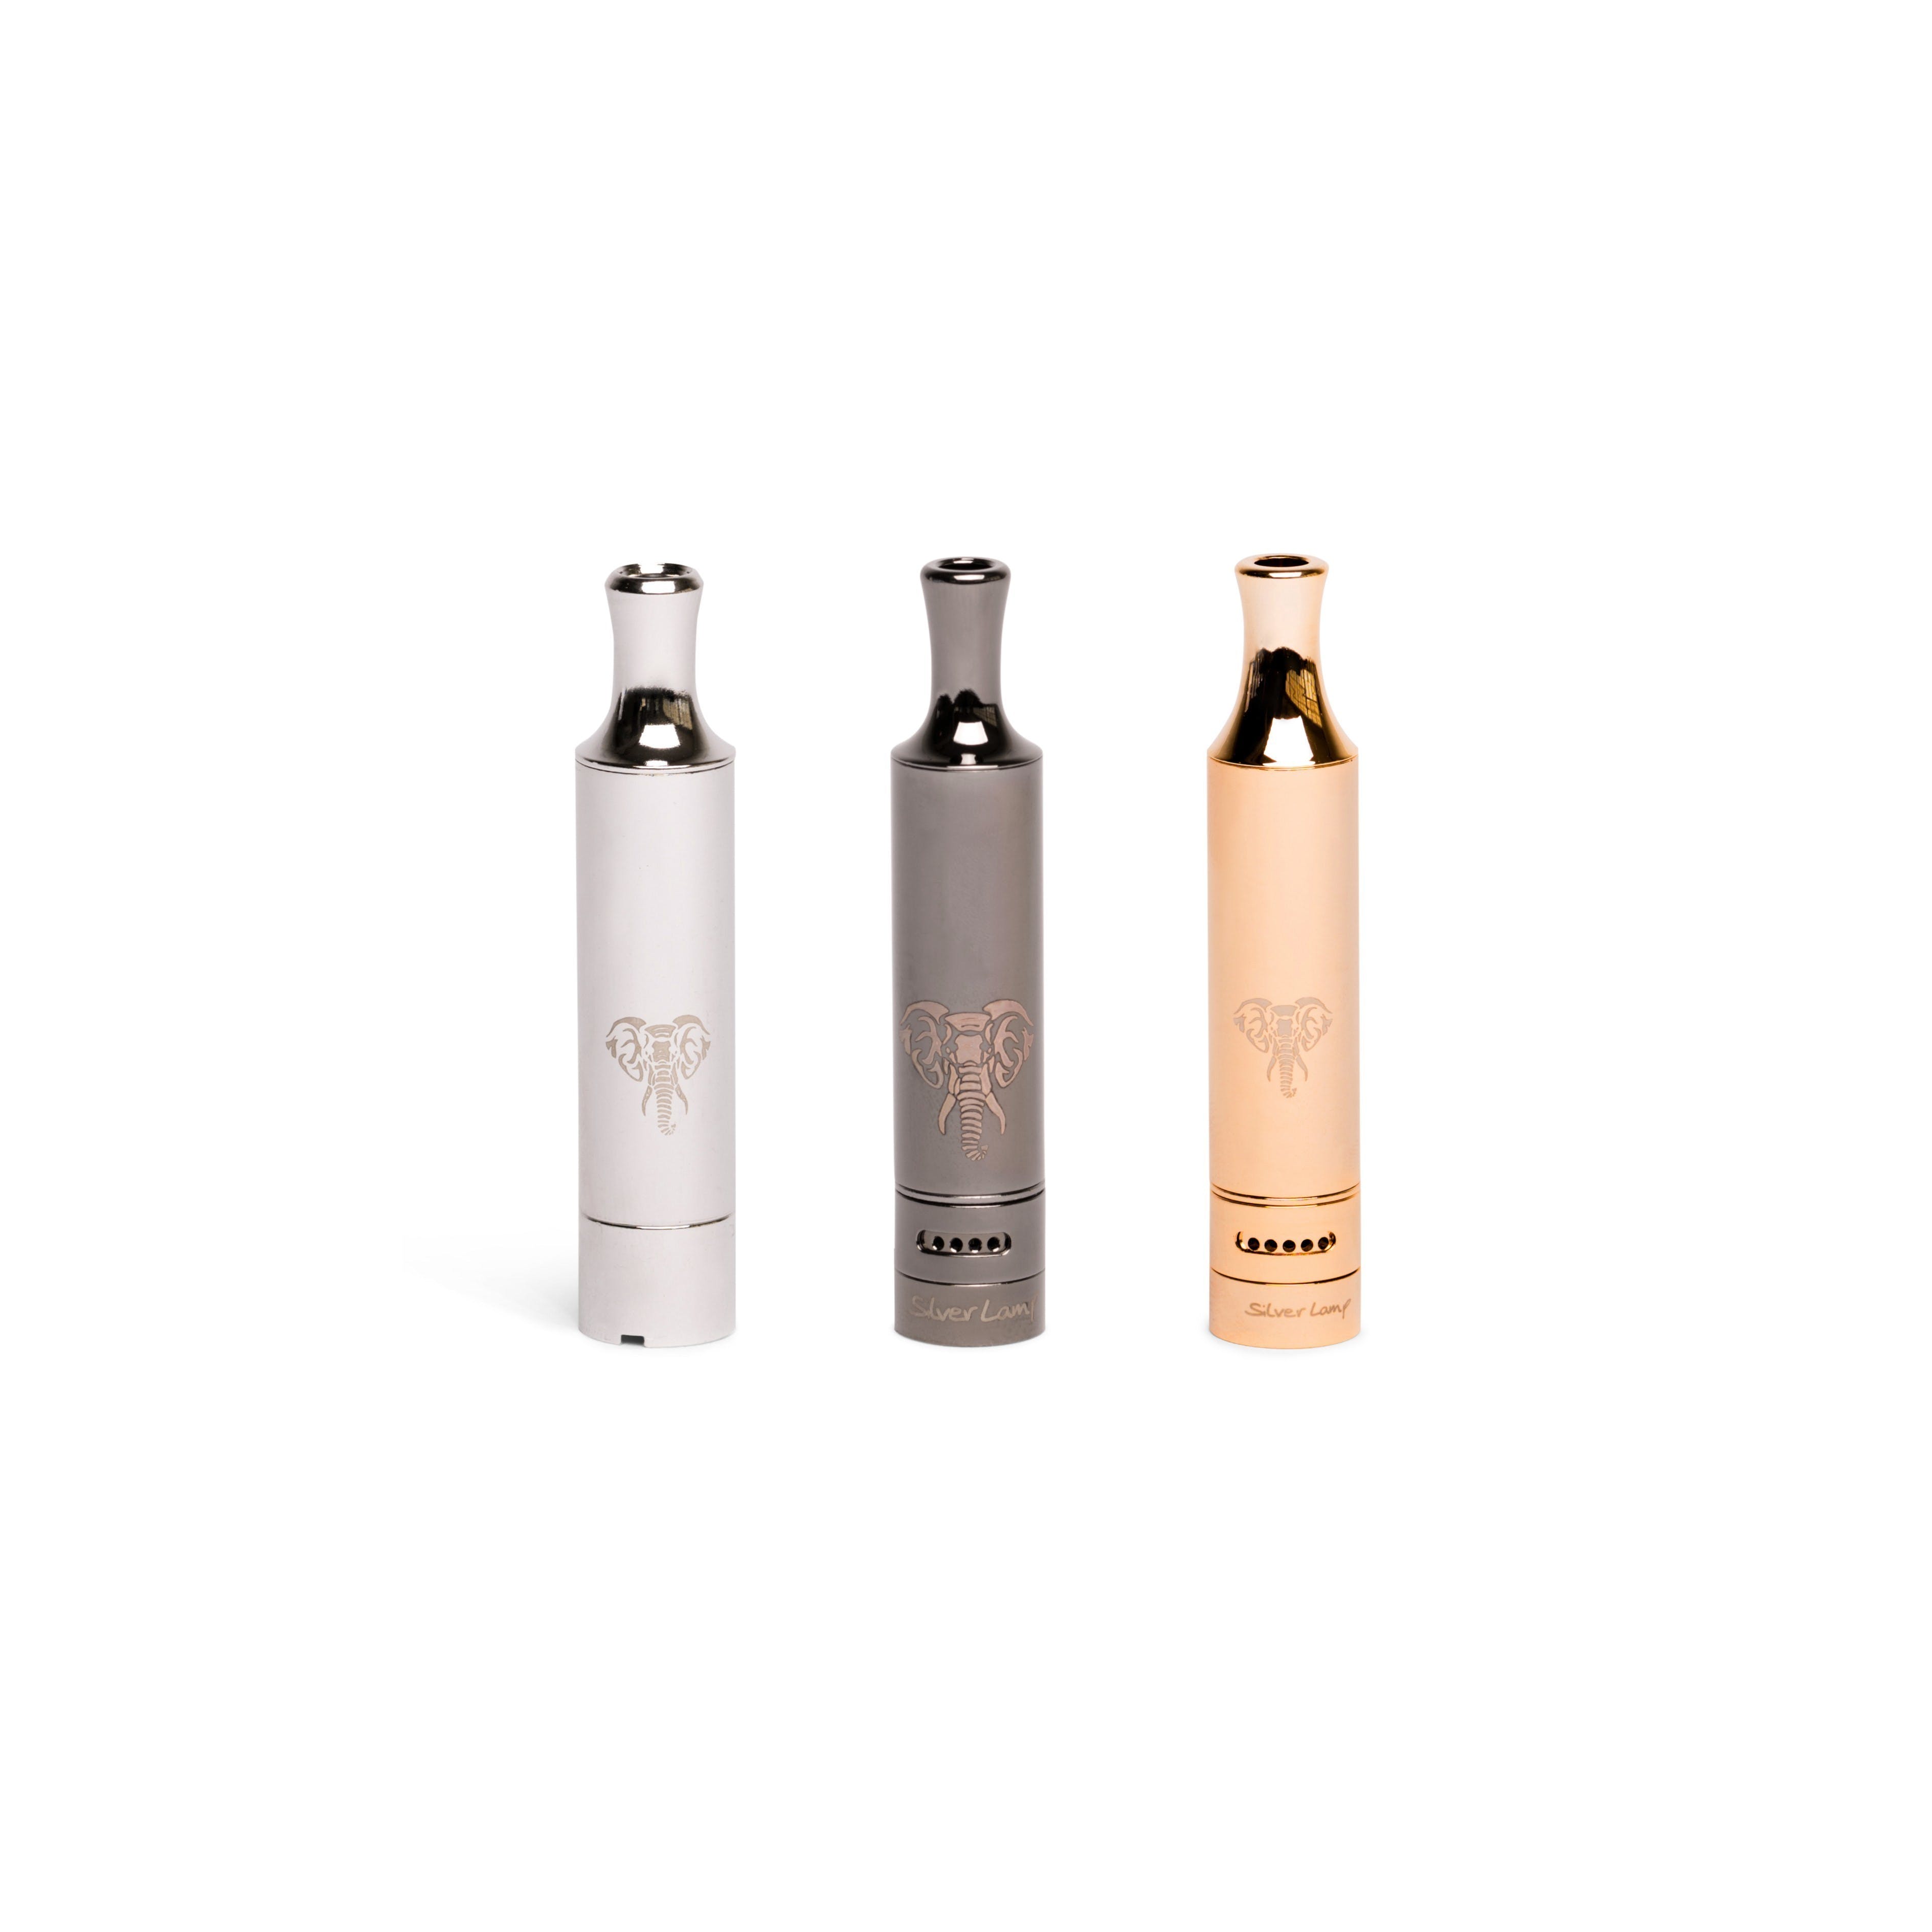 The Silver Lamp Atomizer